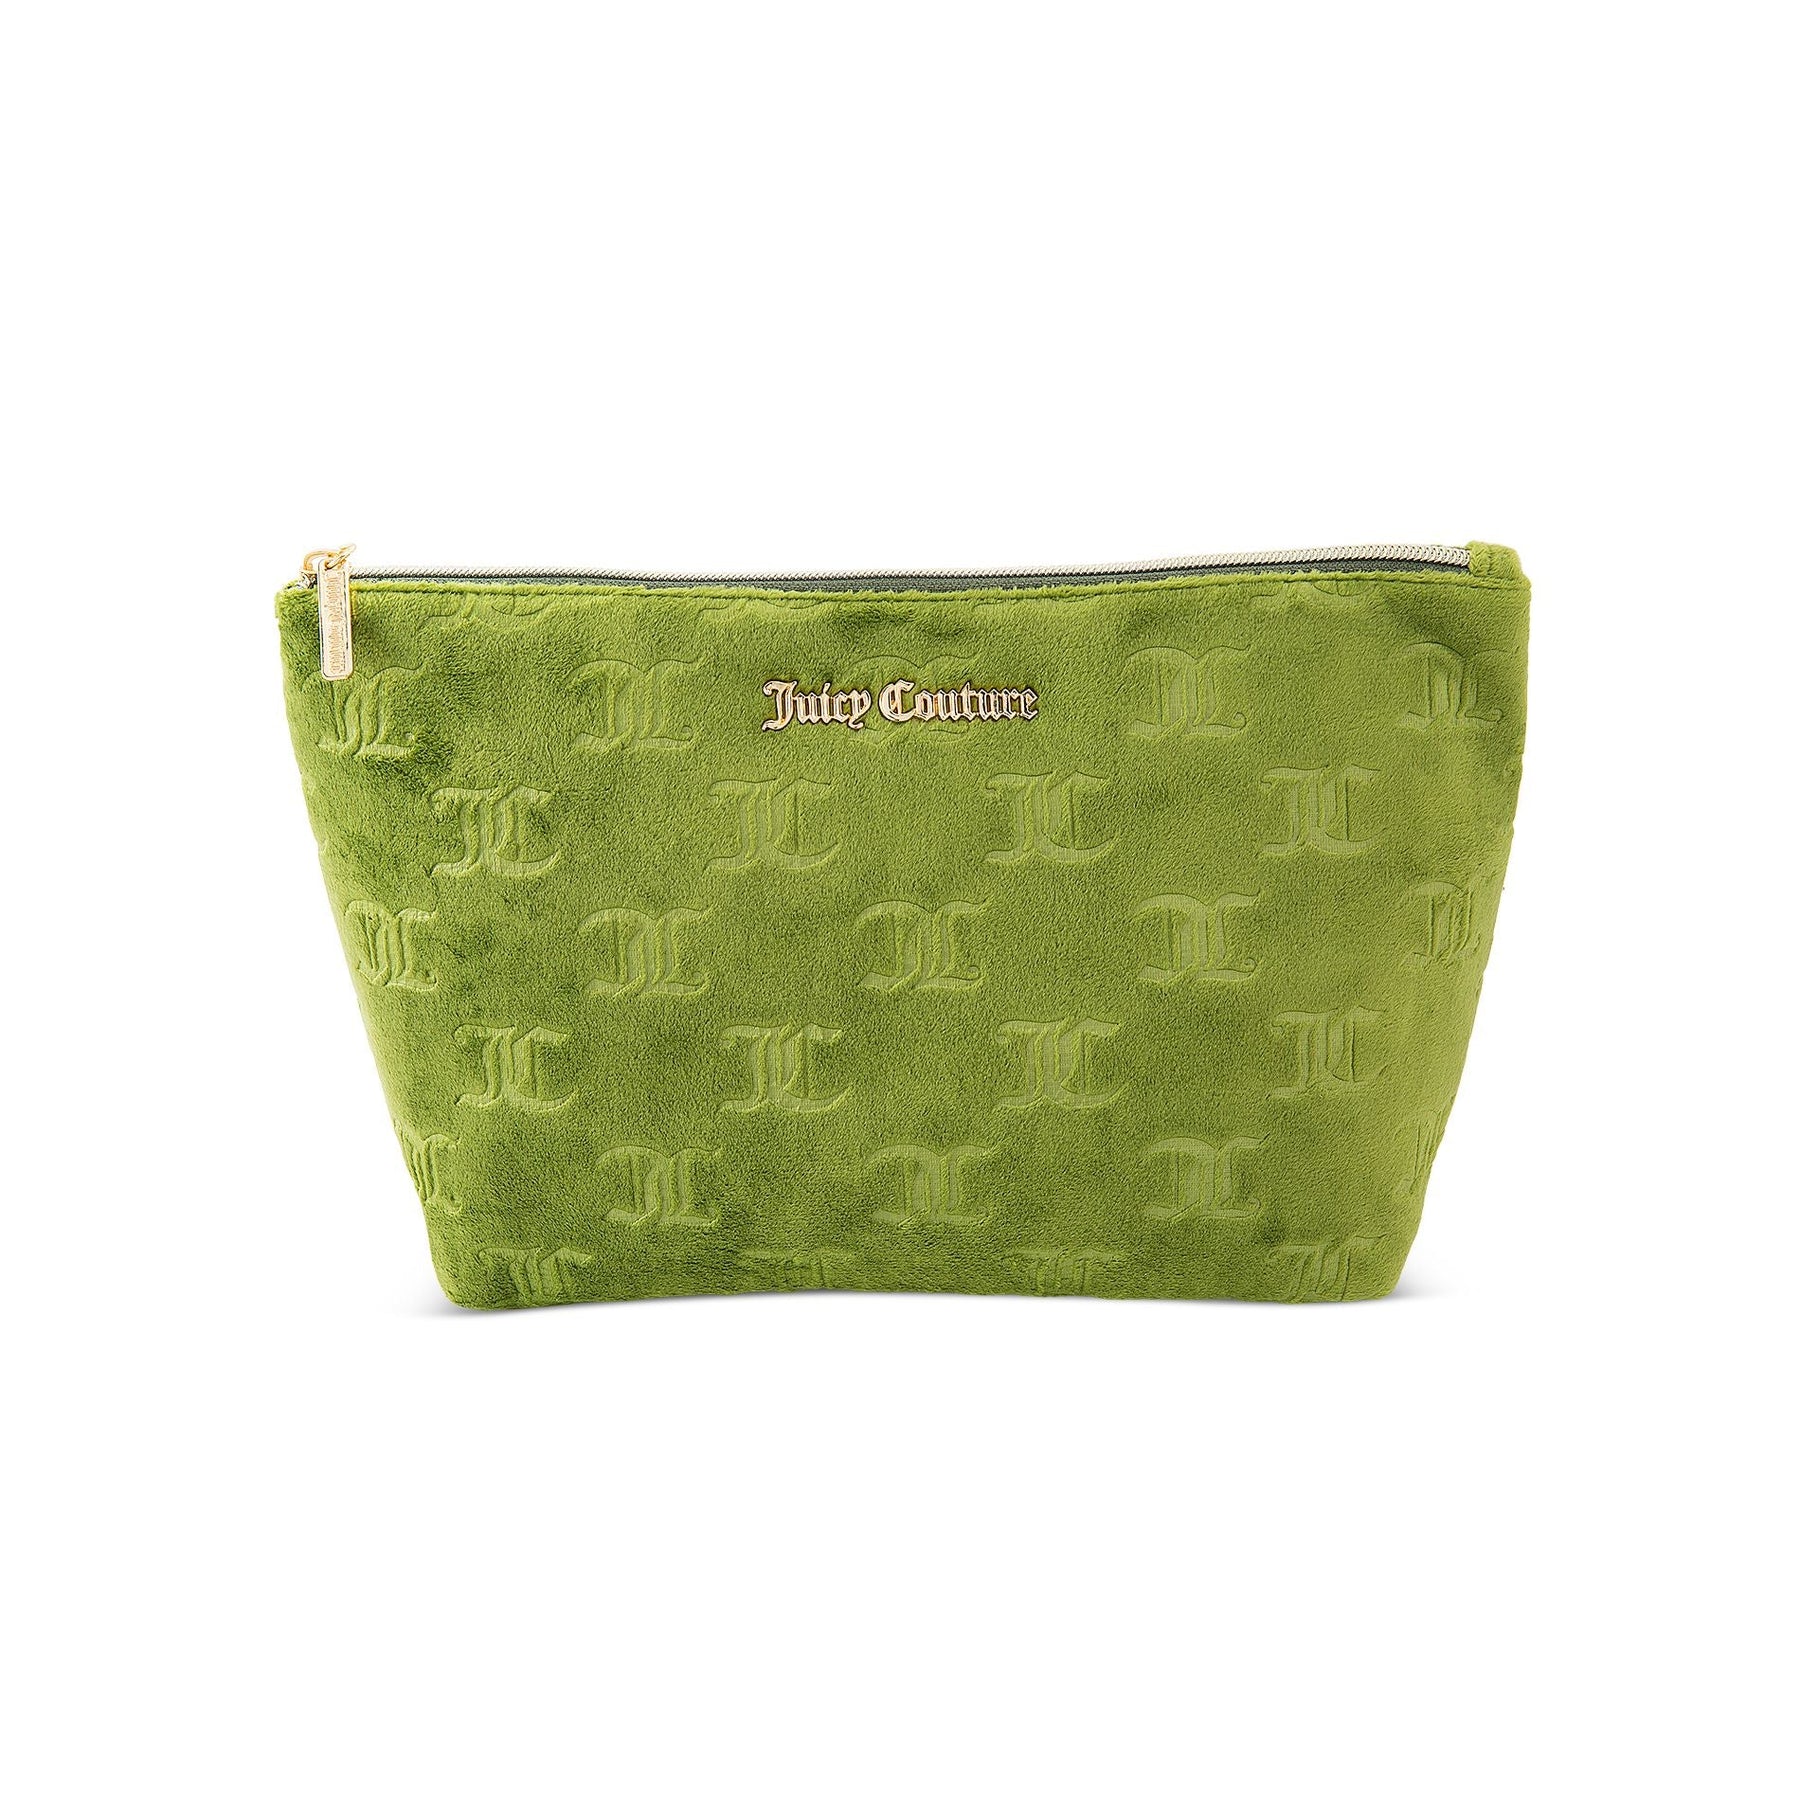 Juicy Couture Monogram Makeup Pouch Olive